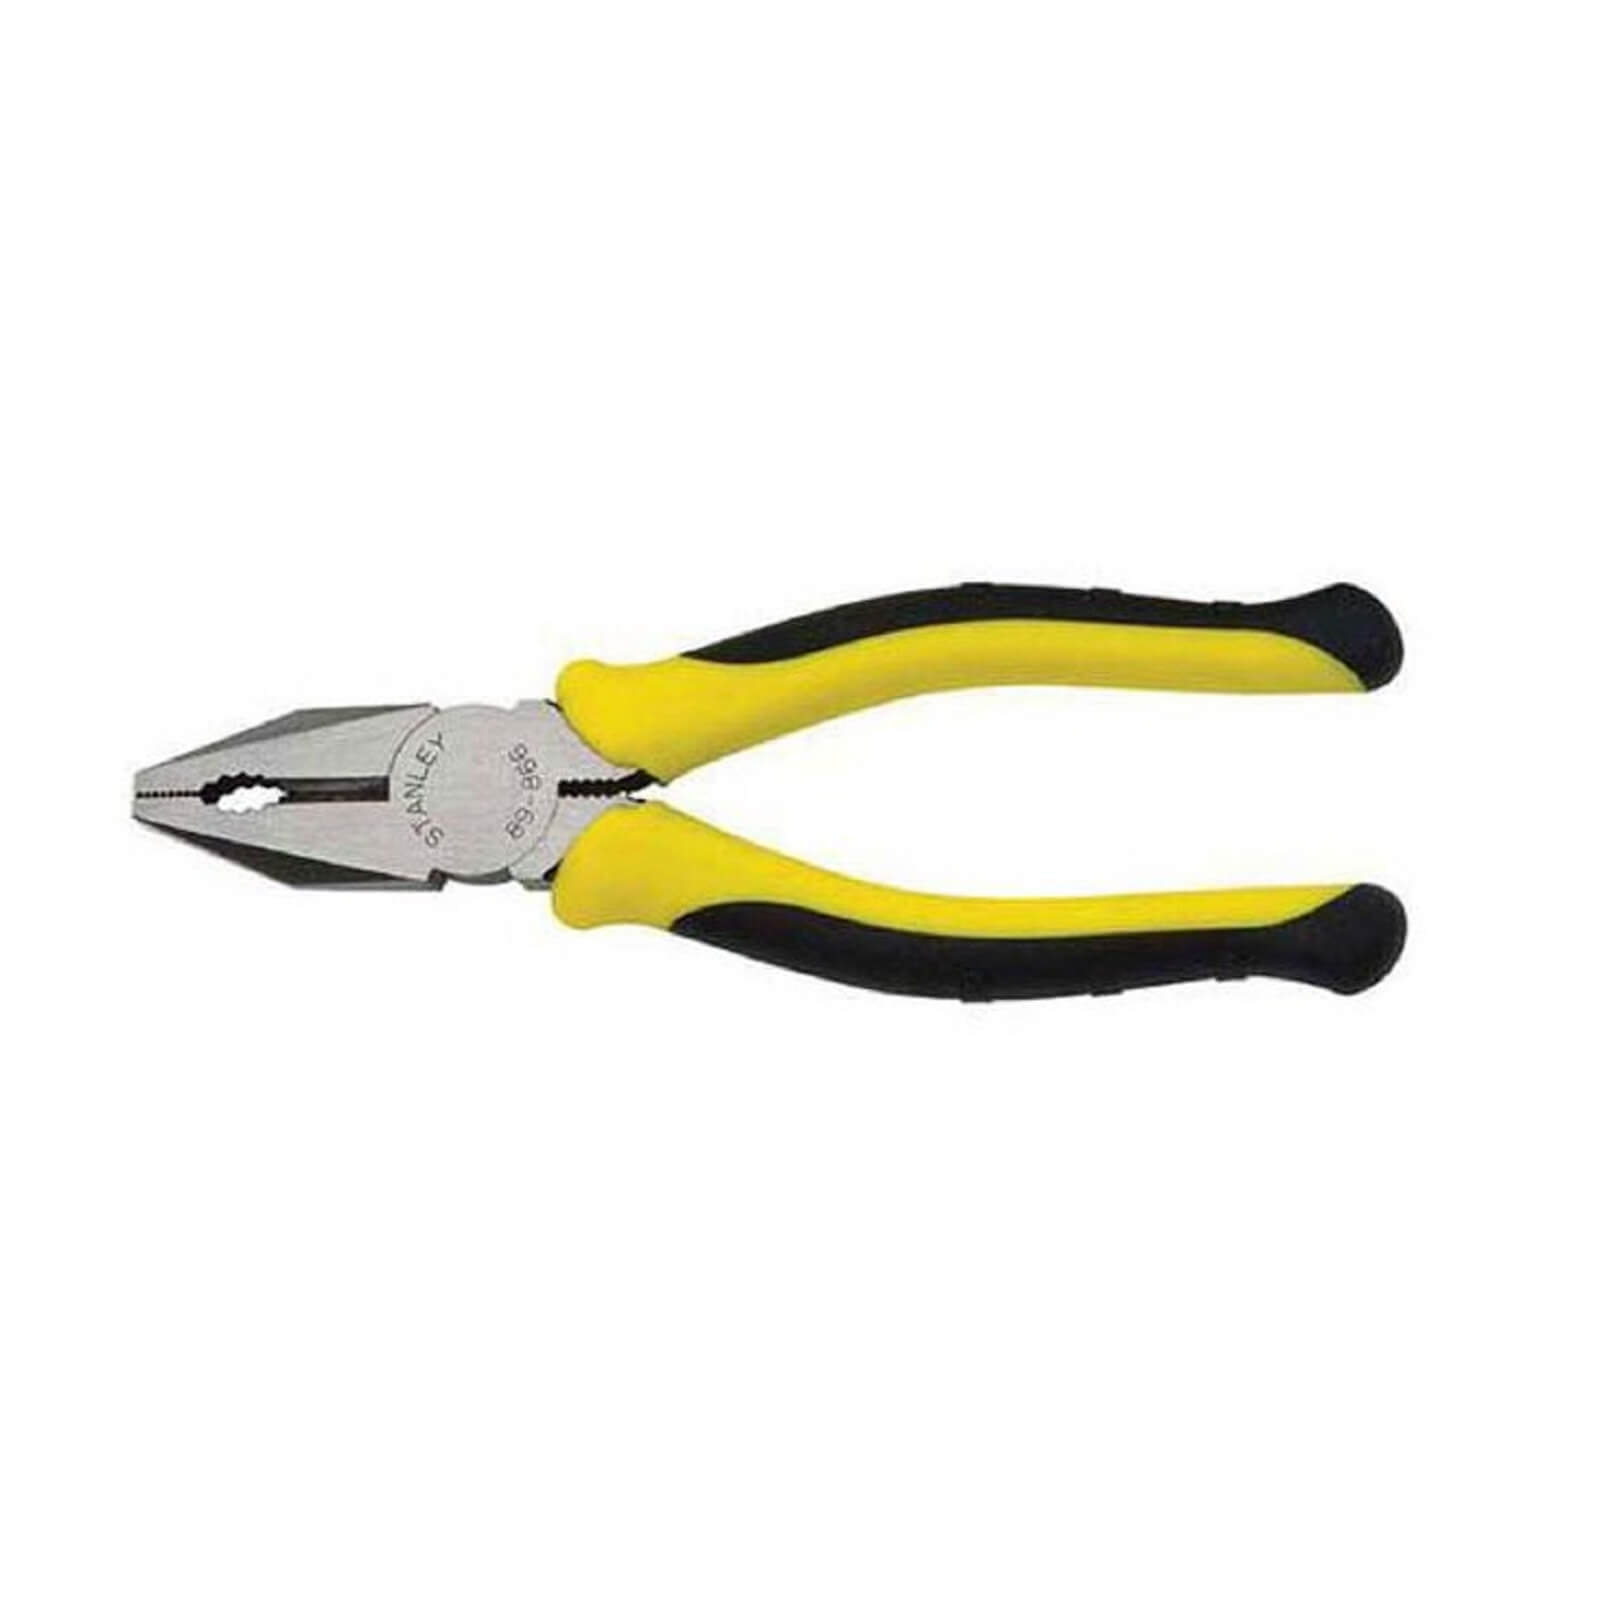 Photo of Stanley Dynagrip Combination Pliers - 150mm